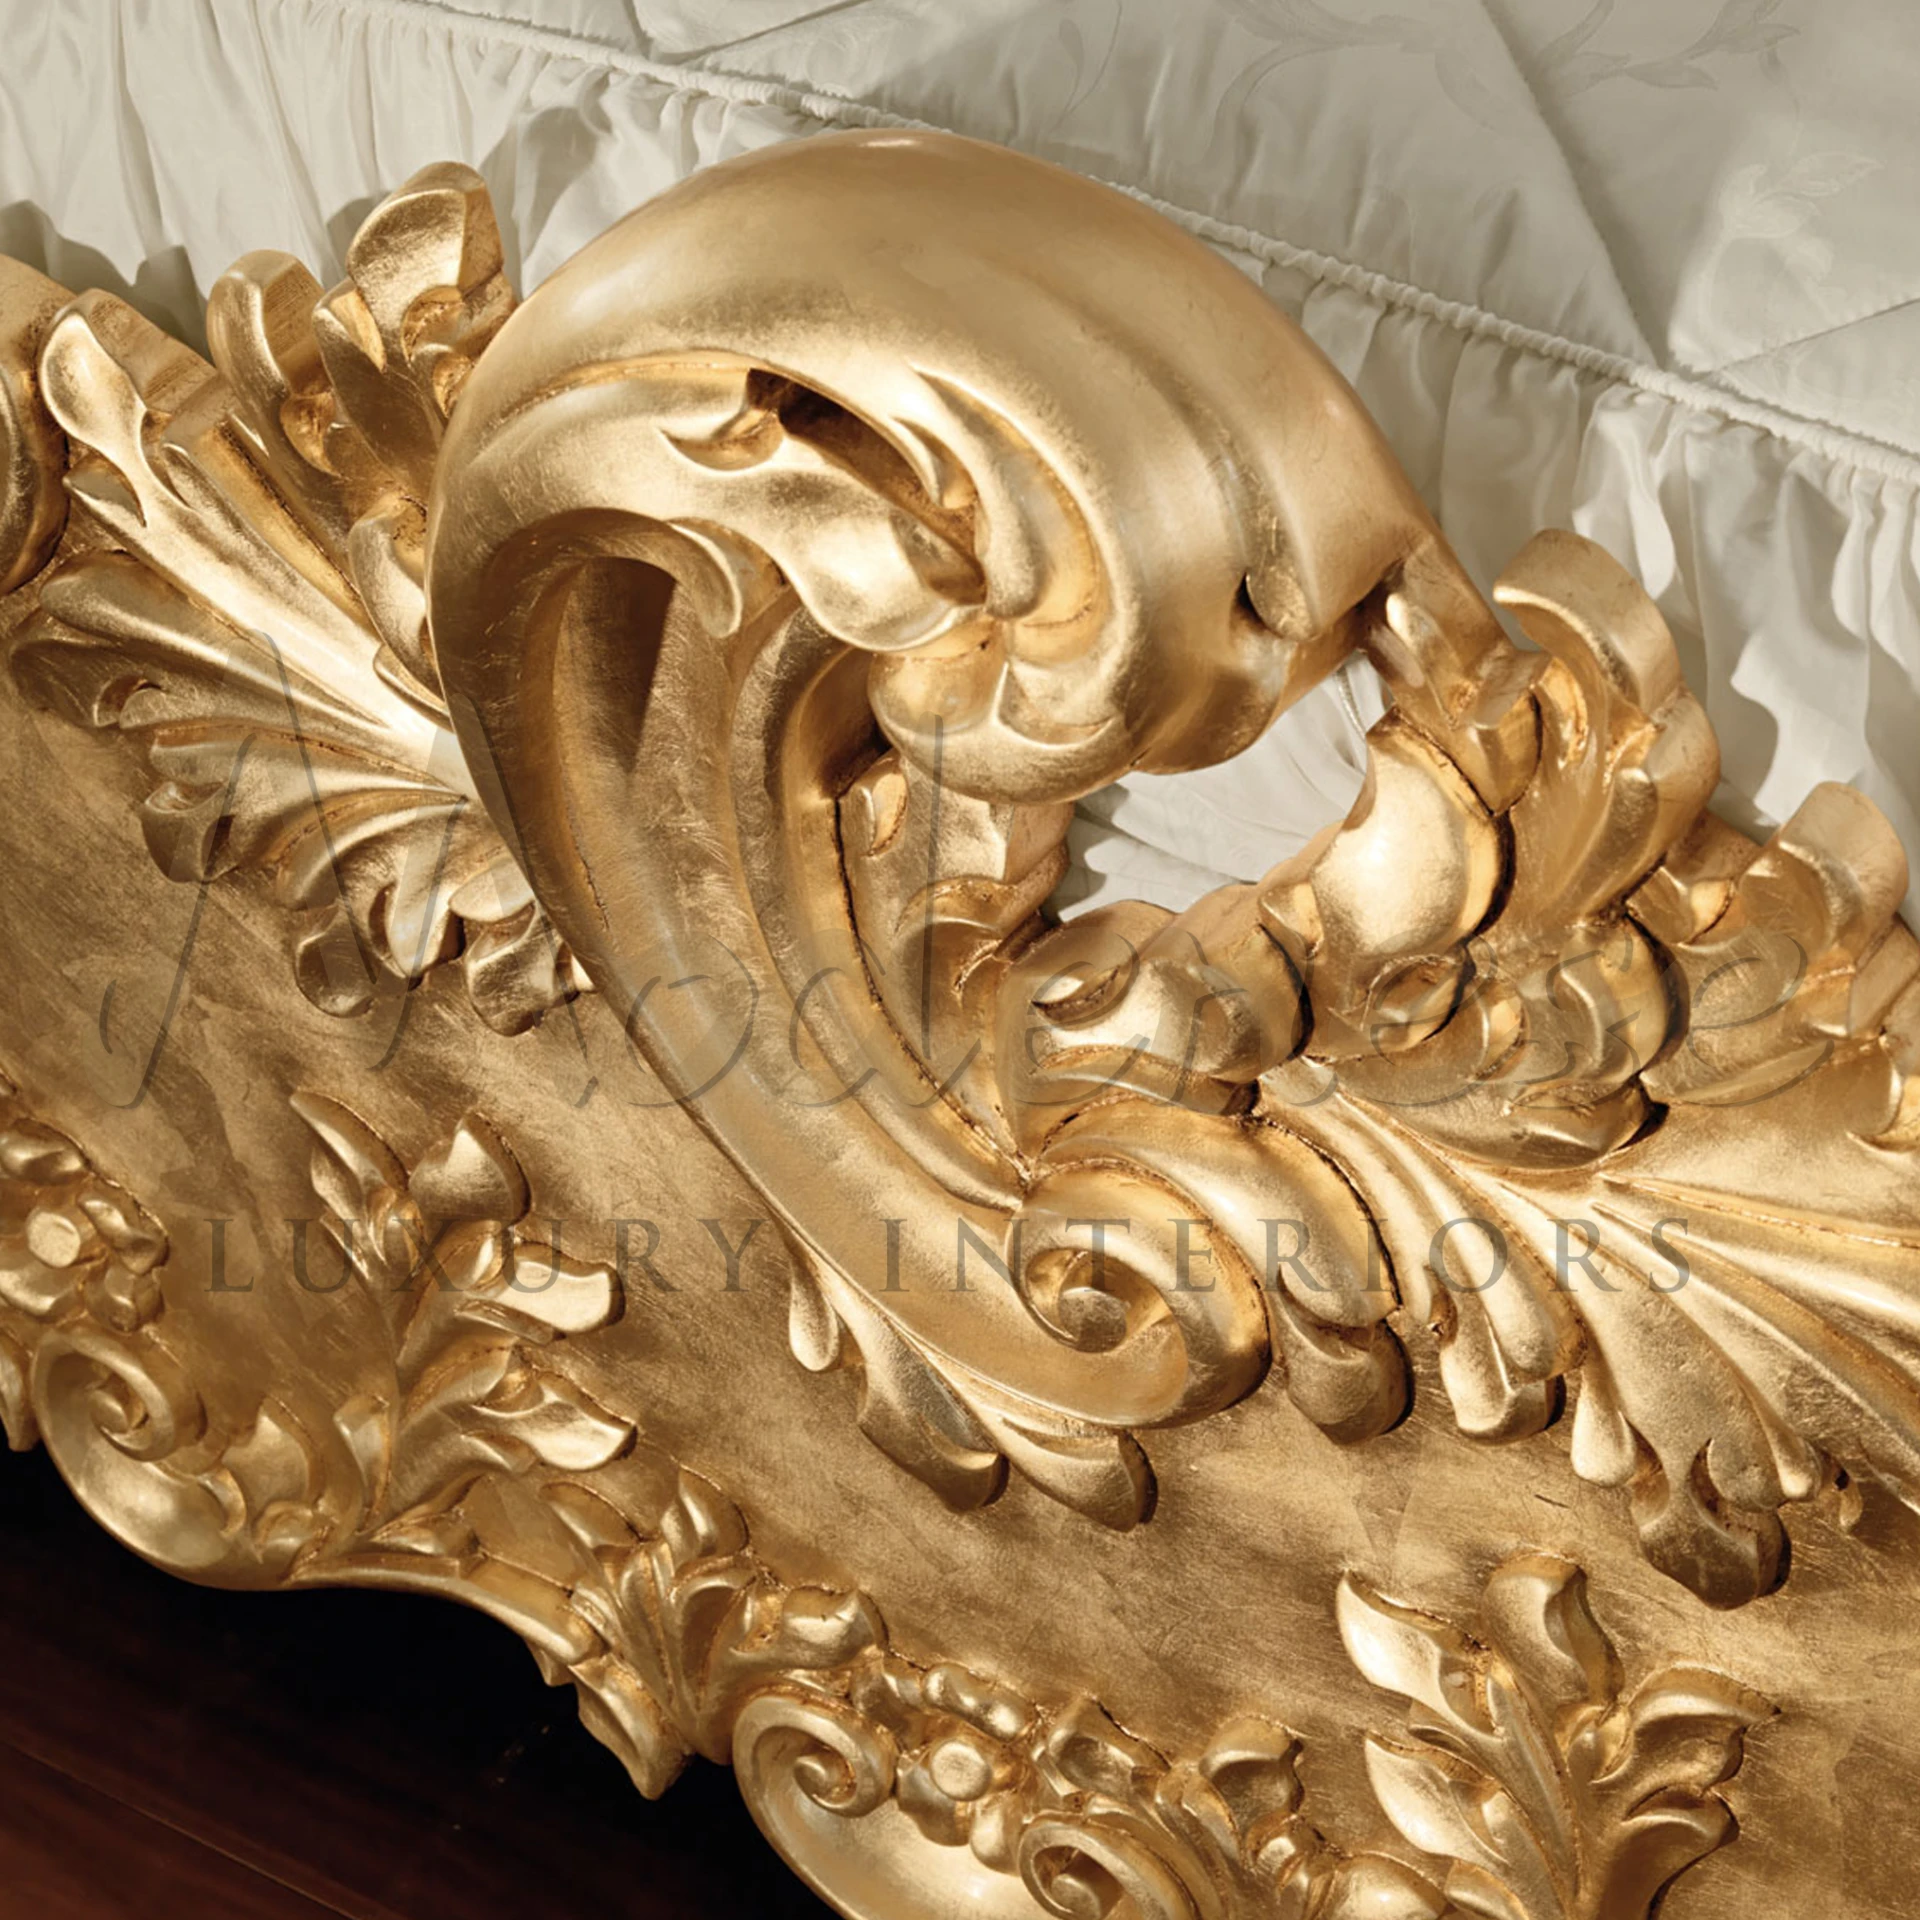 Close-up of a gold-leafed ornate carving on furniture created by Modenese Furniture Manufacturer, showcasing intricate craftsmanship and elegant swirls.